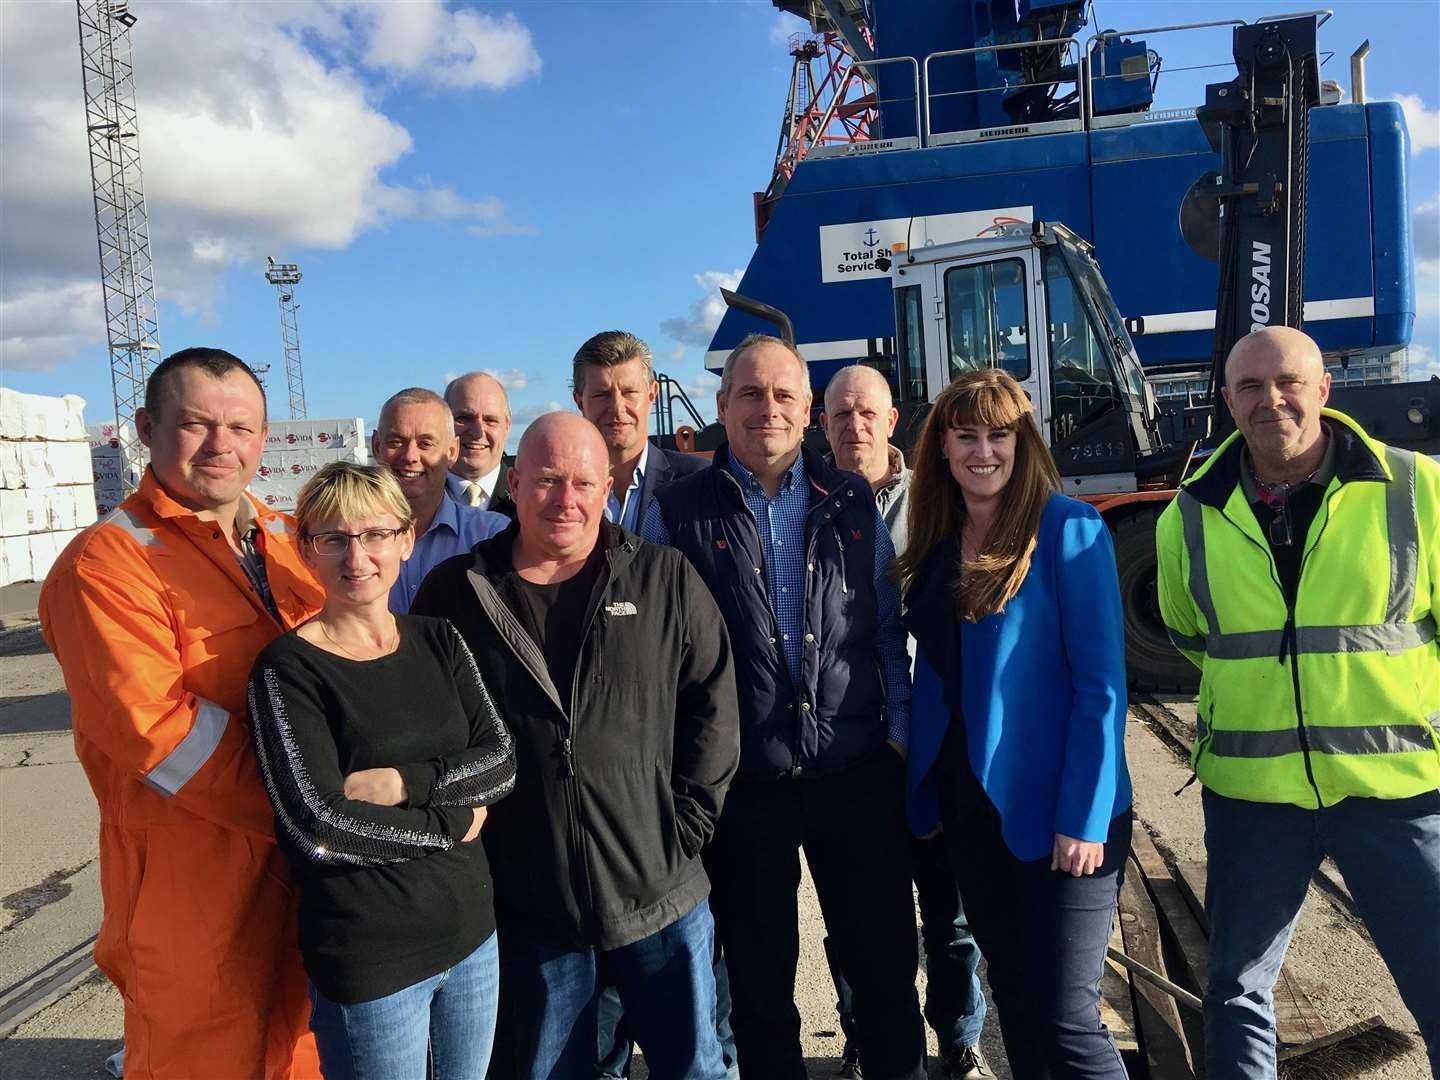 Kelly Tolhurst, second from right, has given her support for the workers at Chatham Docks following an election pledge in 2019